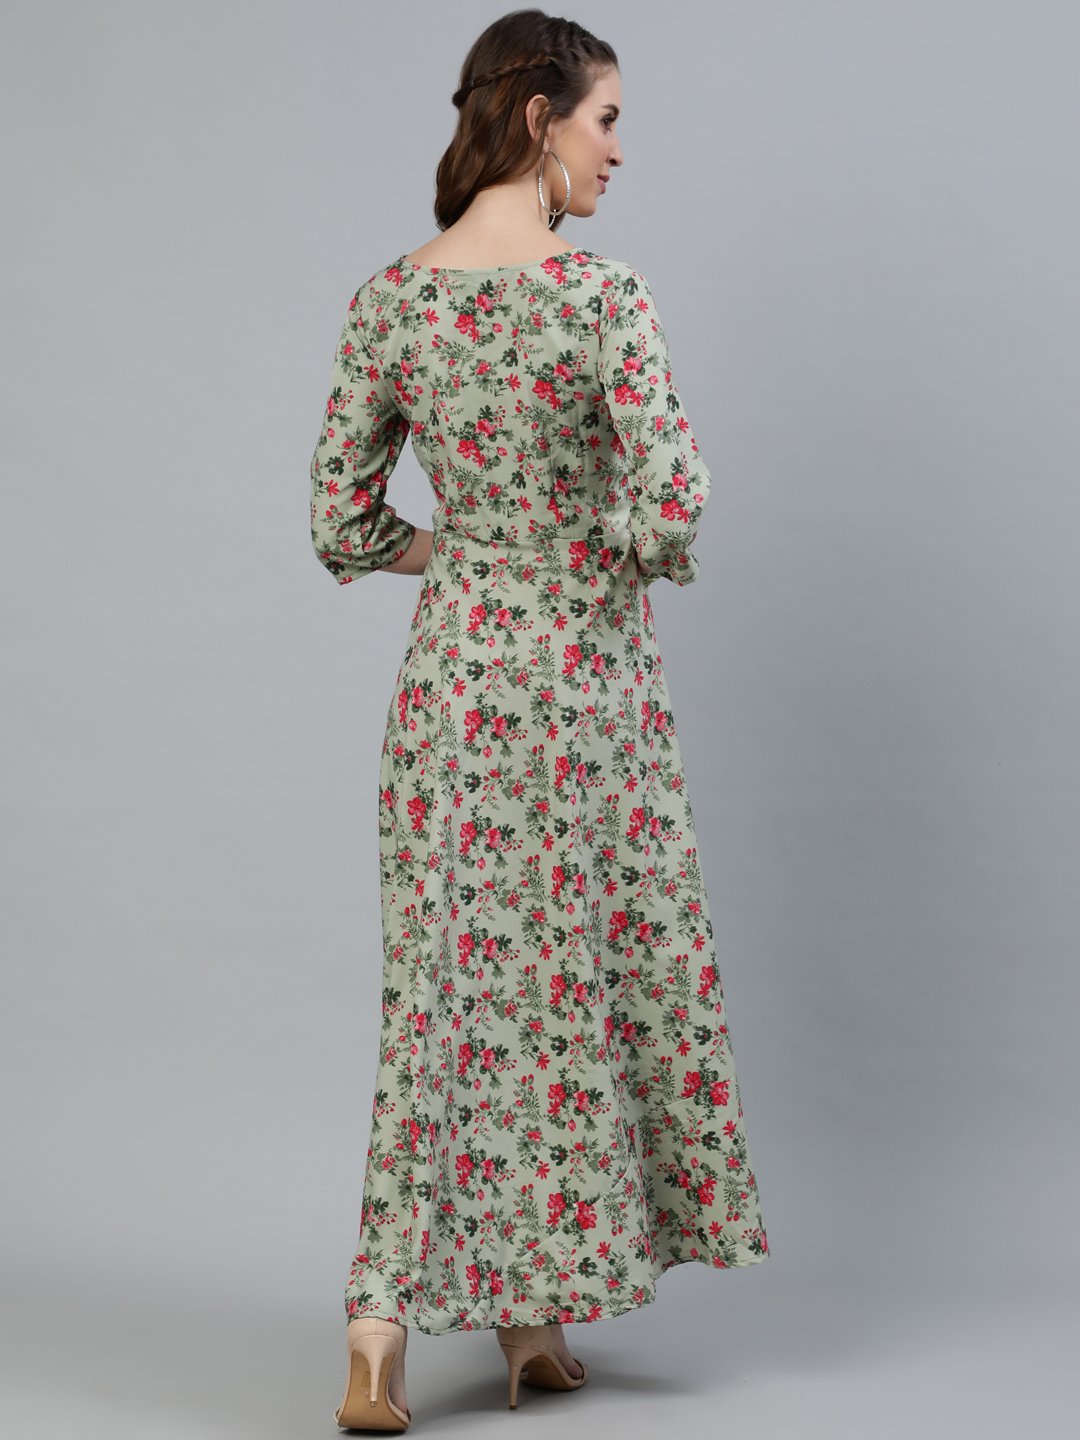 Women's Green Floral Printed Maxi Dress With Three Quarter Sleeves - Nayo Clothing